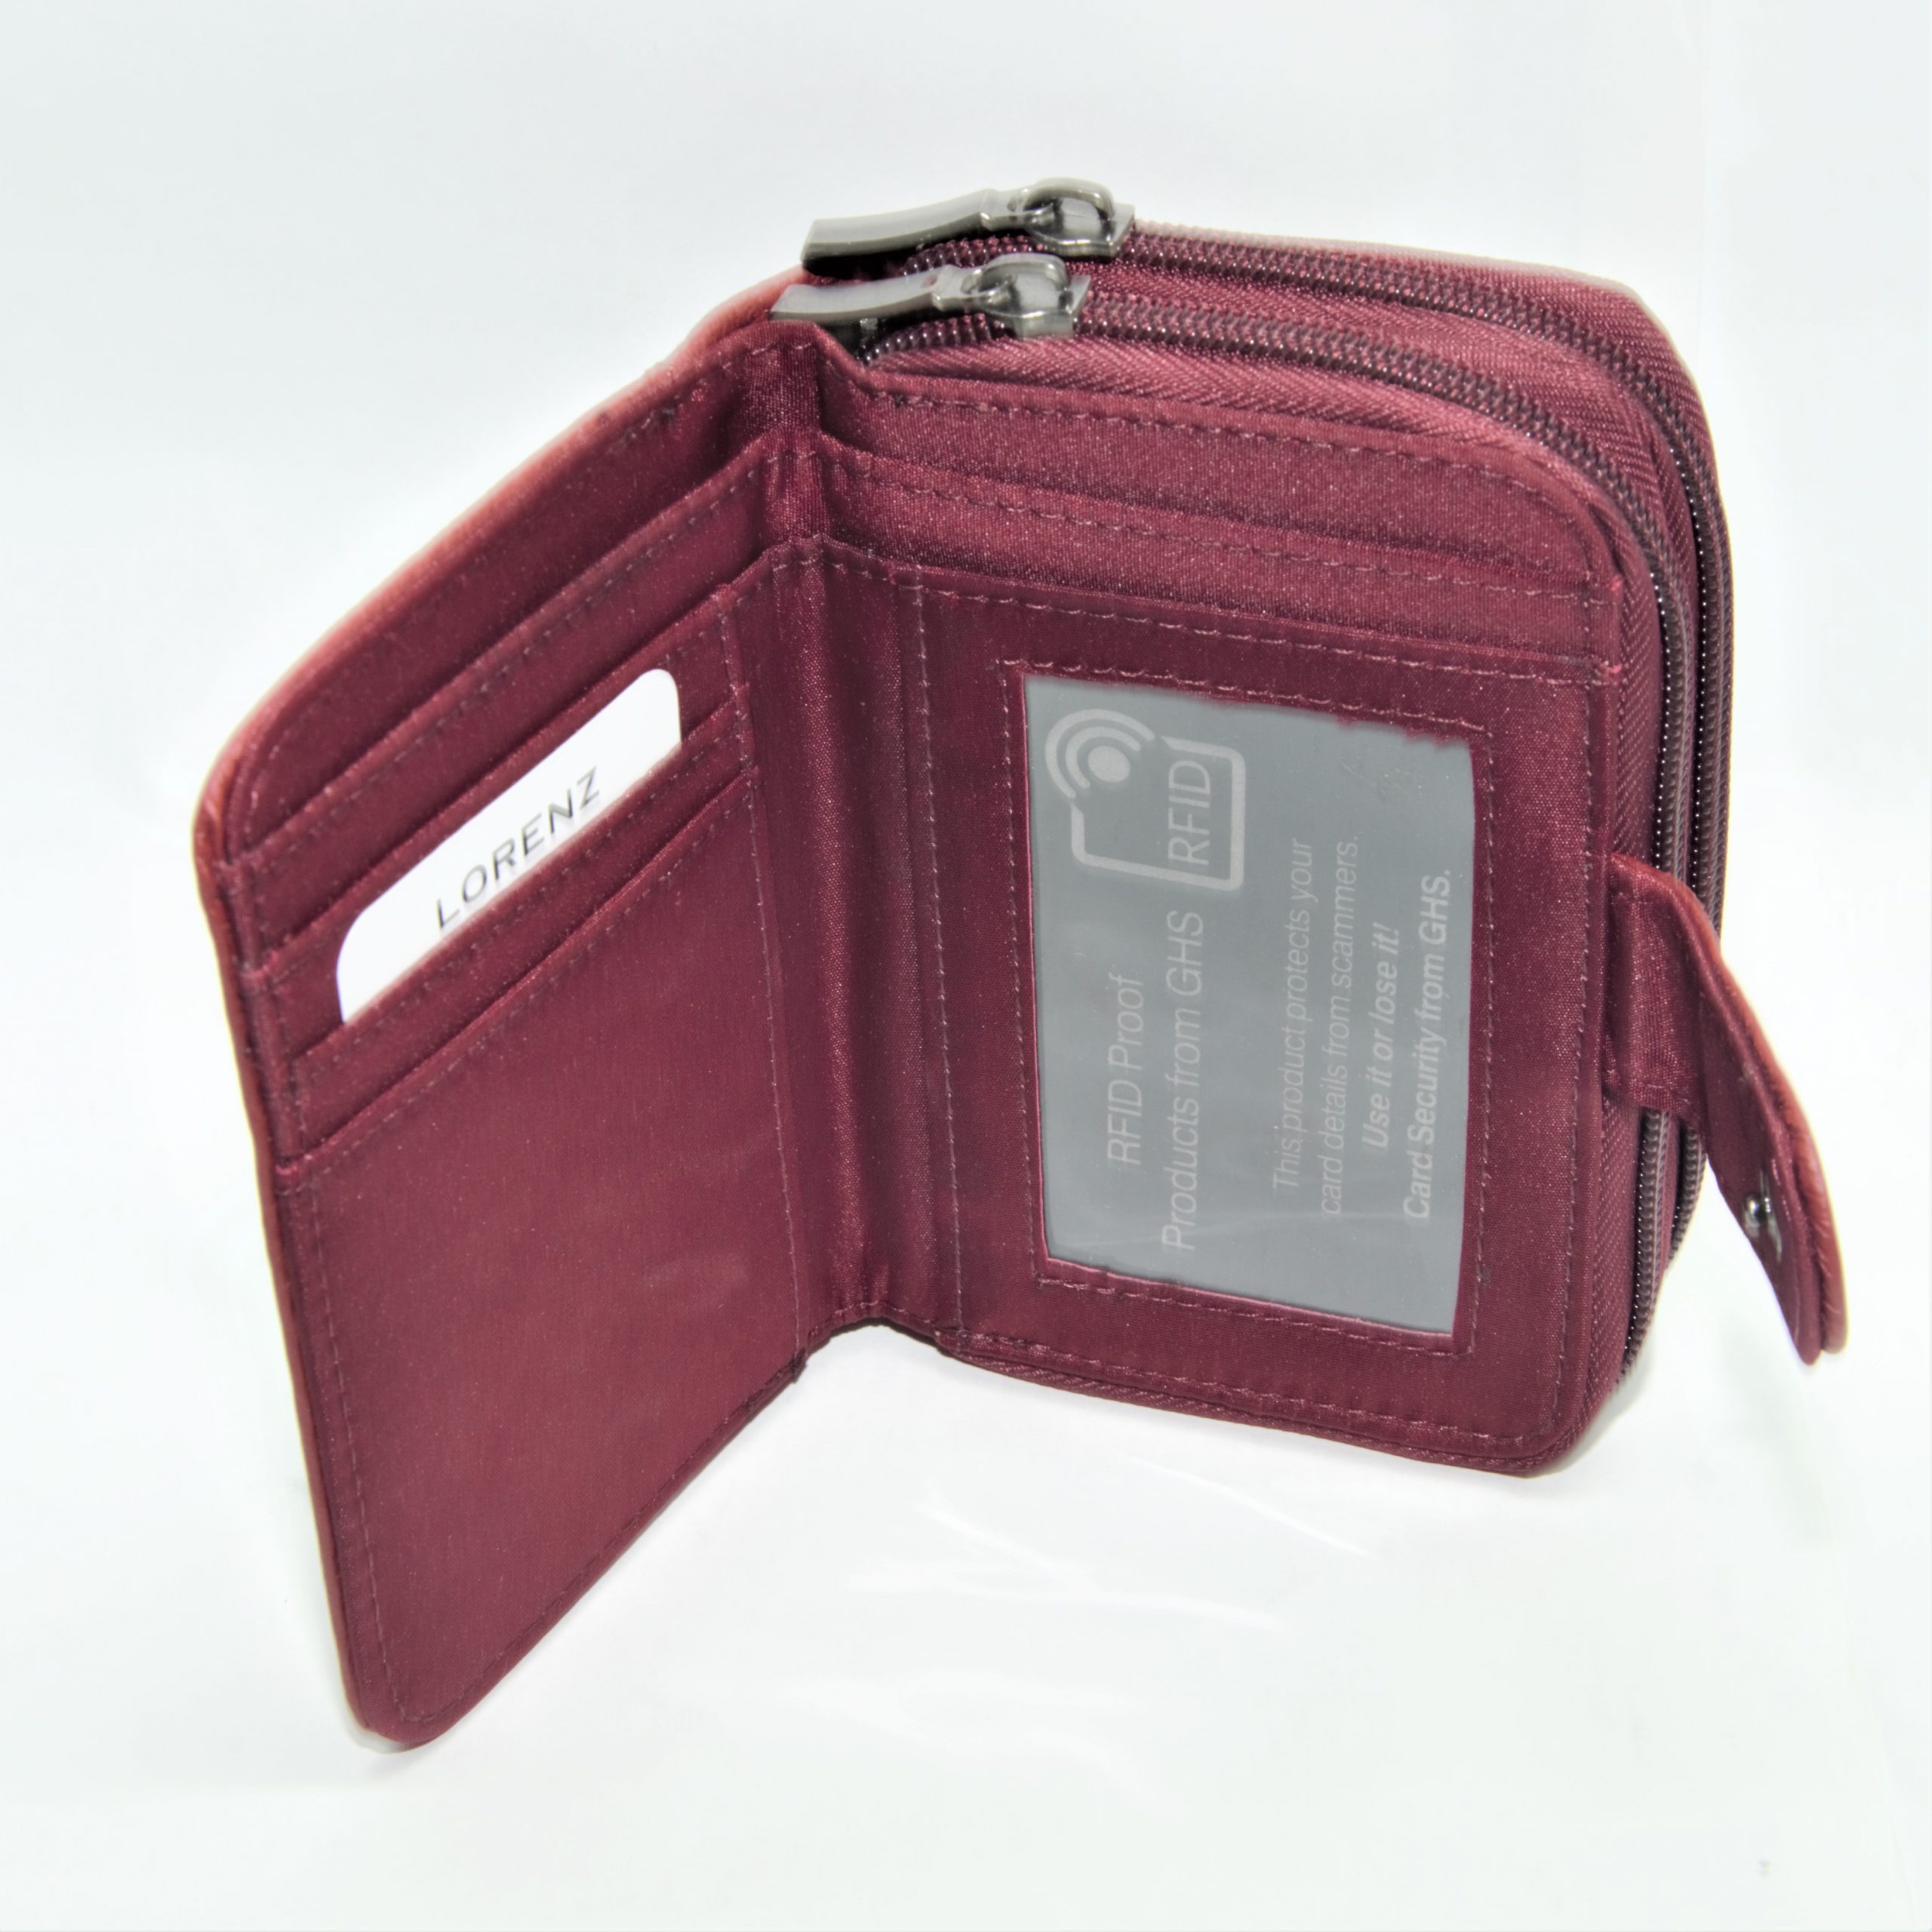 Lorenz Leather RFID Purse - Style No. 3707 - OJP Products